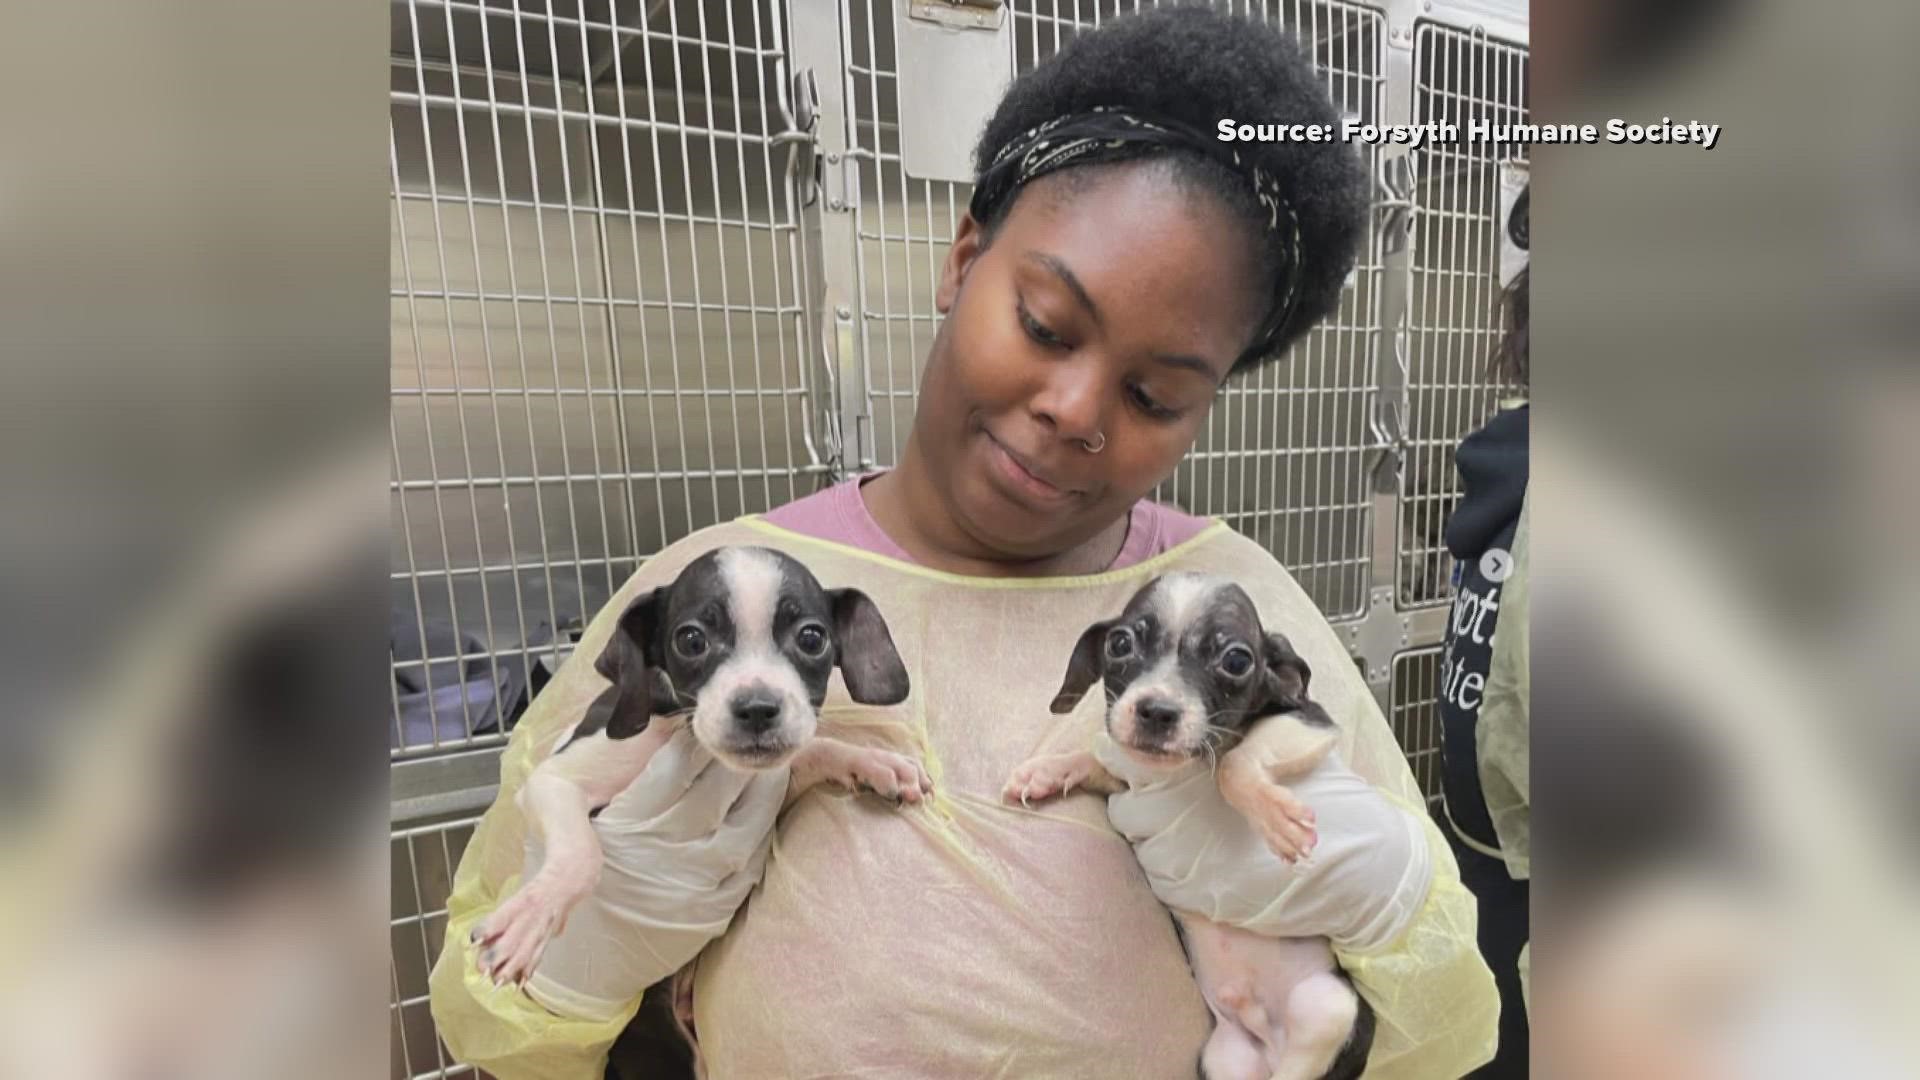 The Forsyth Humane Society said it needs to find homes for the puppies soon. It was at maximum capacity before the dogs were dropped off.